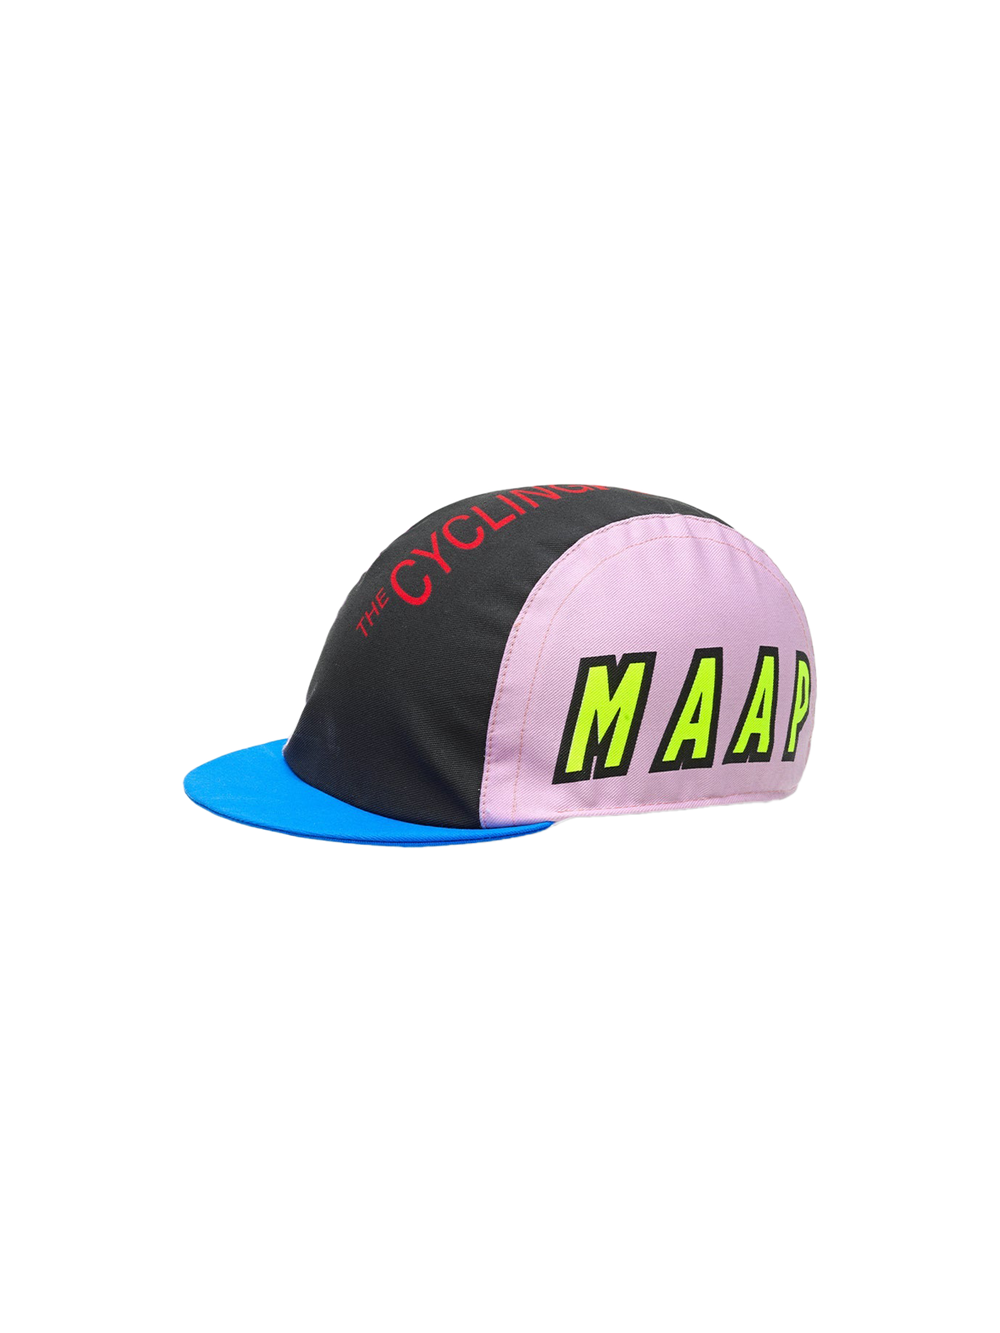 Product Image for MAAP x The Cycling Podcast Cap